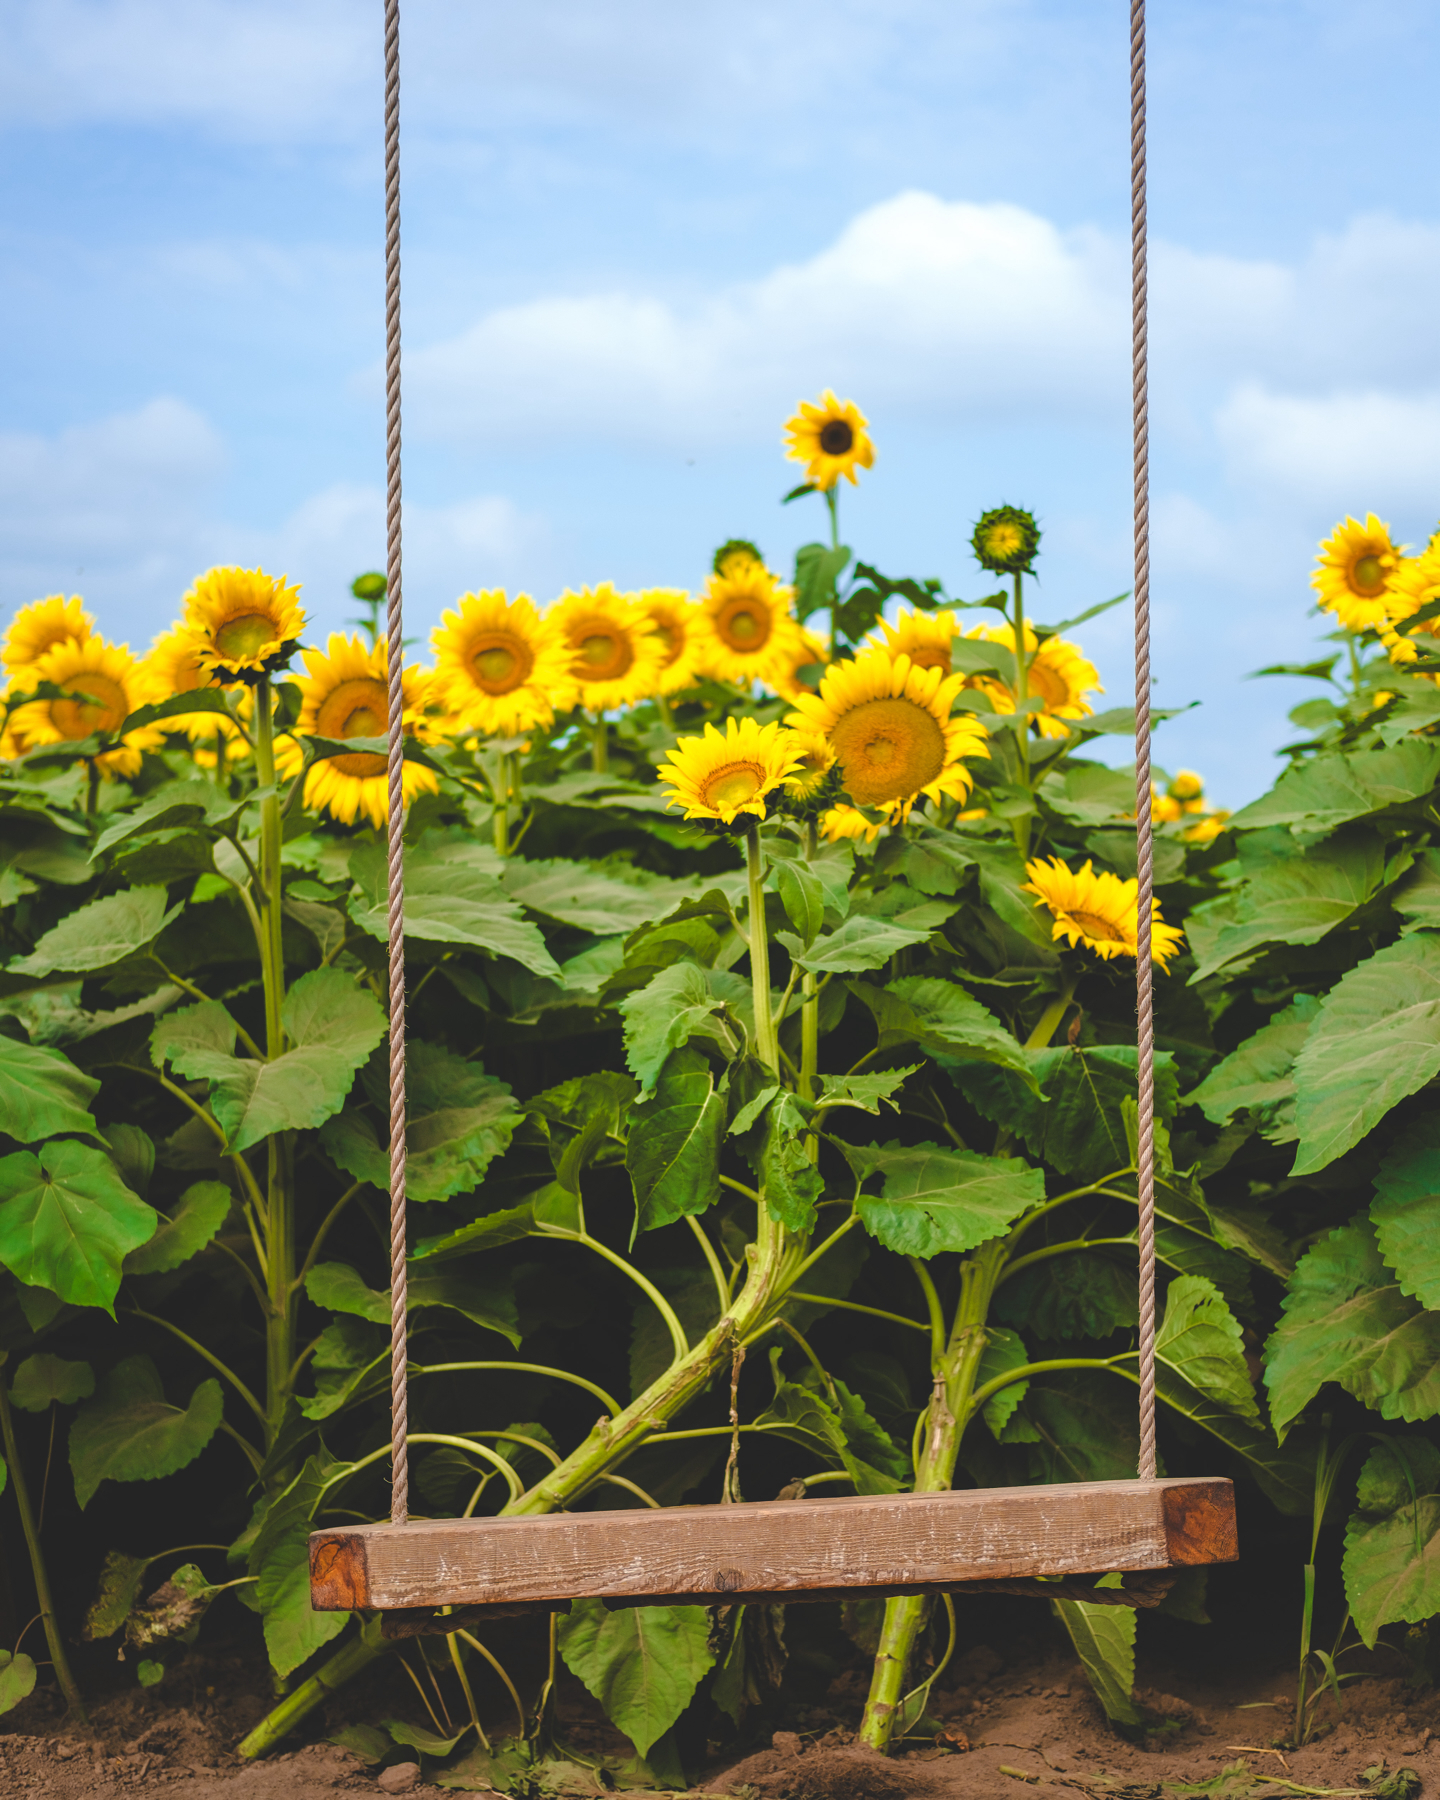 A wooden swing hanging from ropes with a sunflower field in the background under a blue sky.